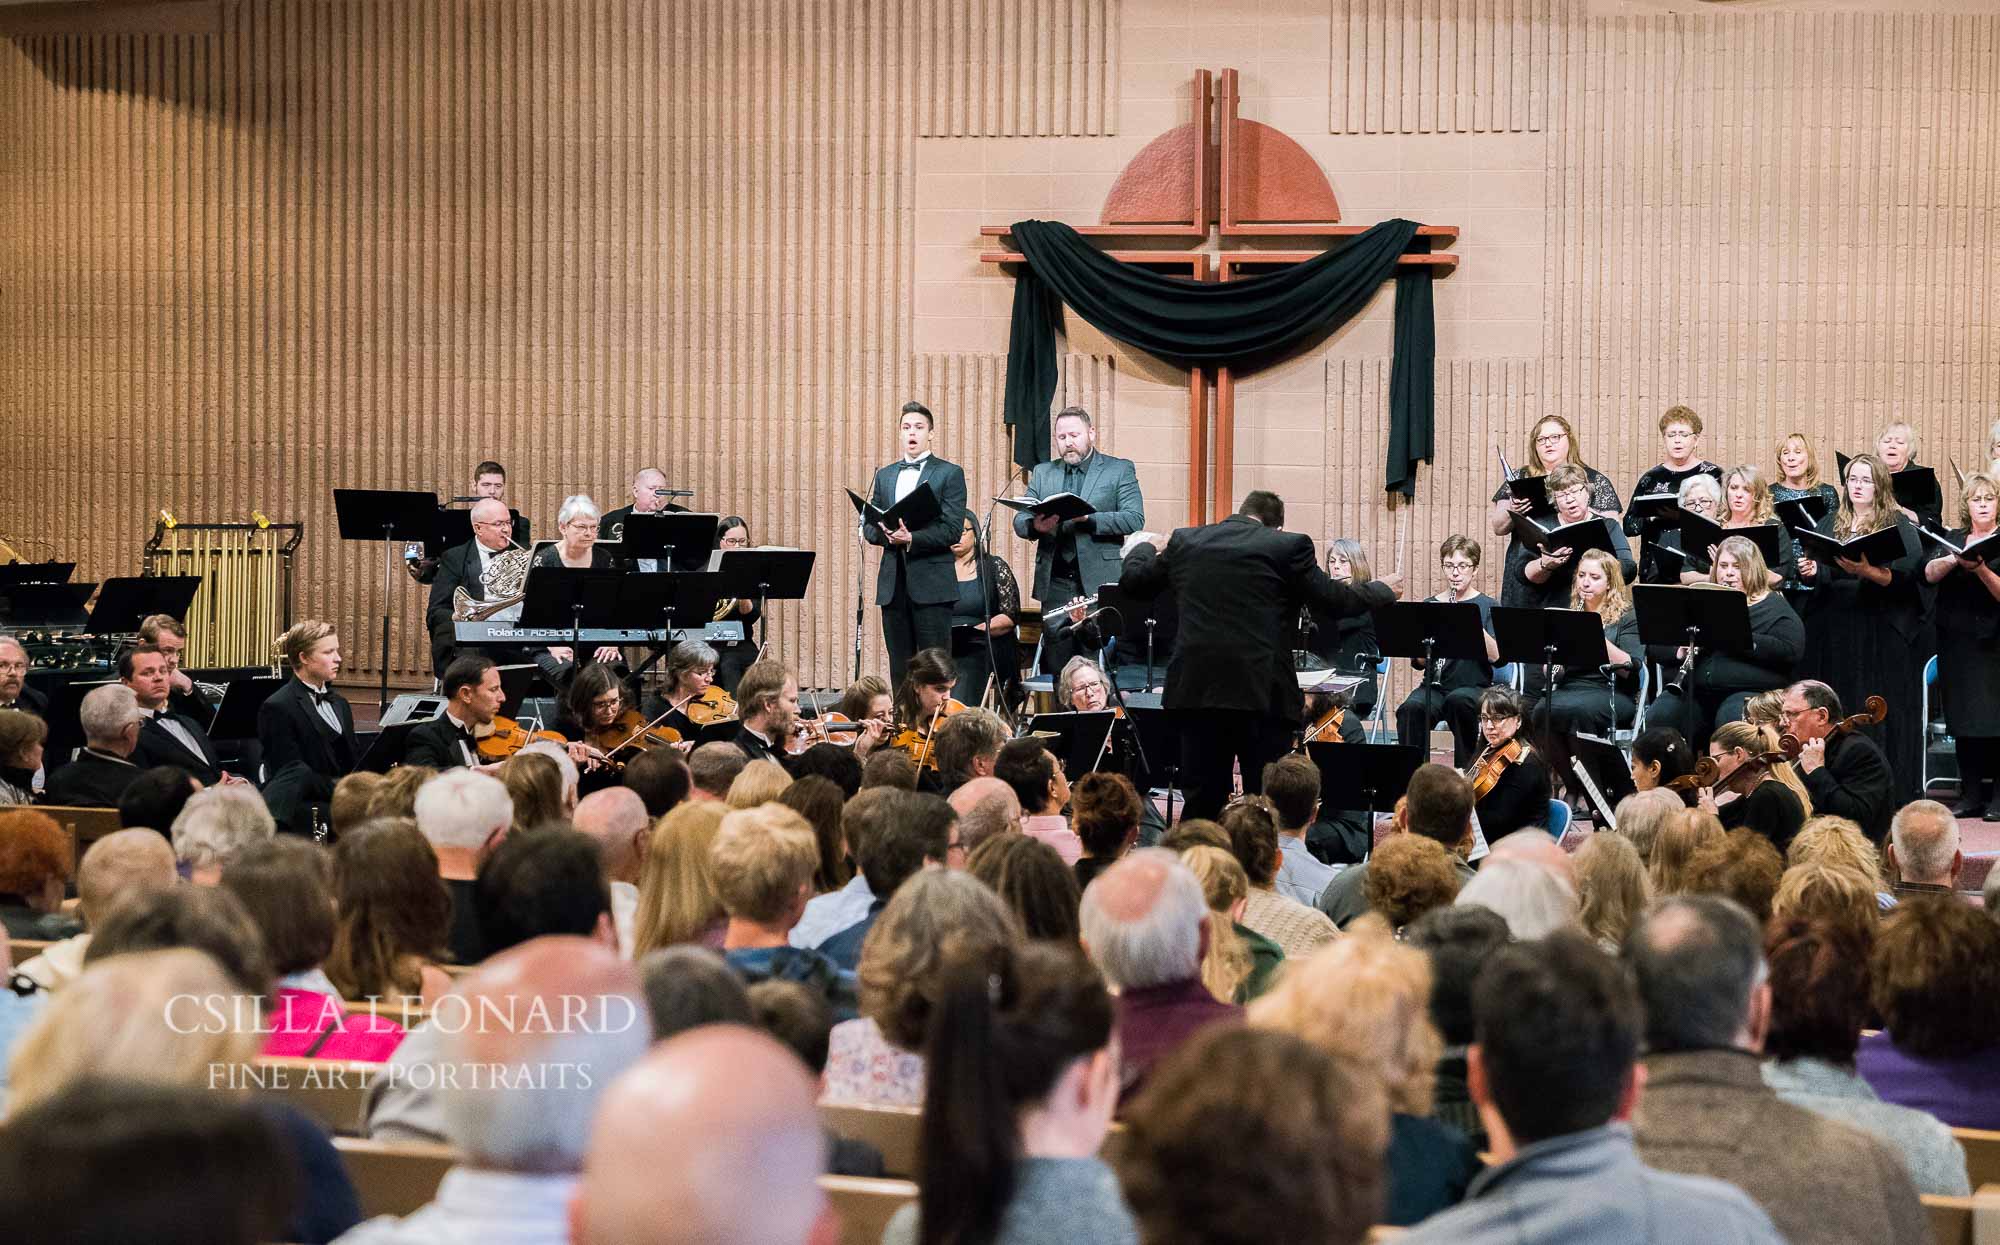 Grand junction photographer shows images of Good Friday concert (13)